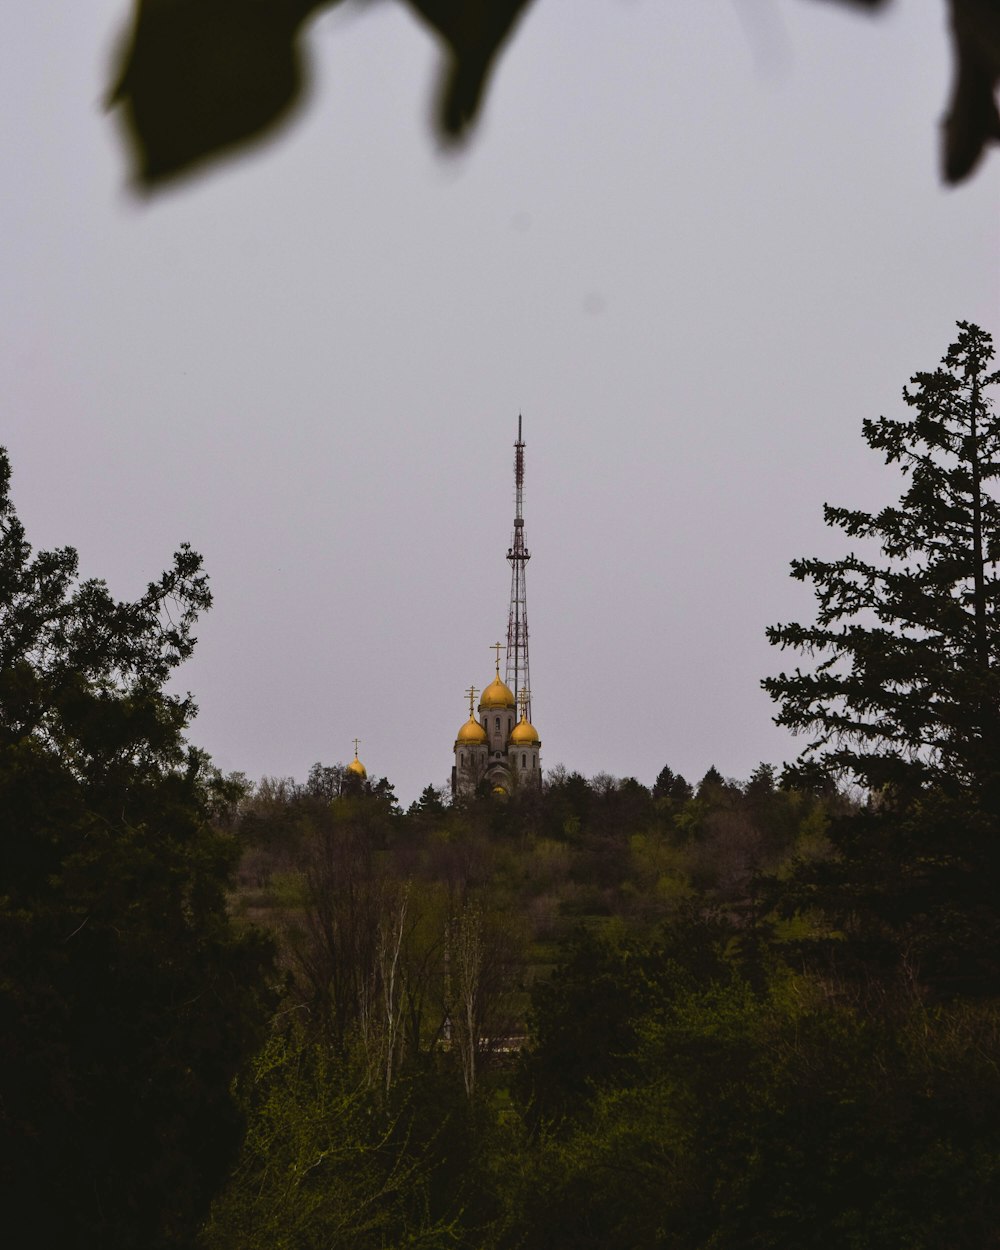 a radio tower on a hill with trees in the foreground